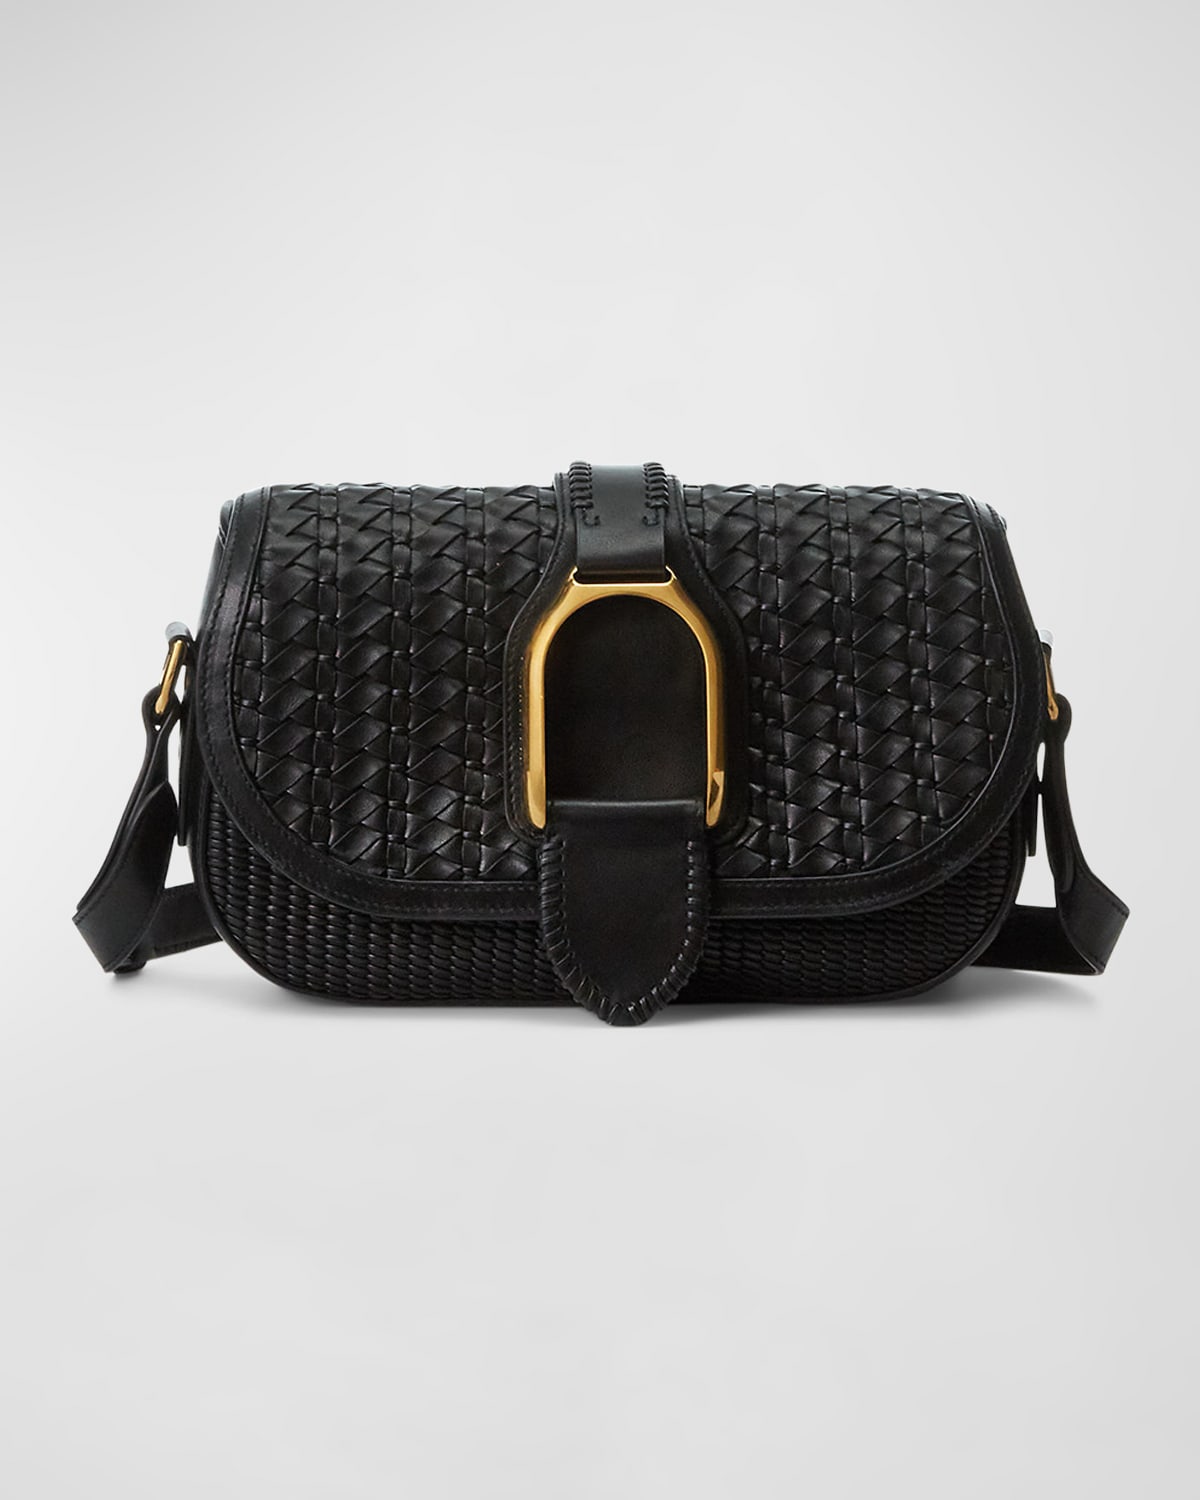 Ralph Lauren Collection Ricky 33 Woven Leather Top-Handle Bag 